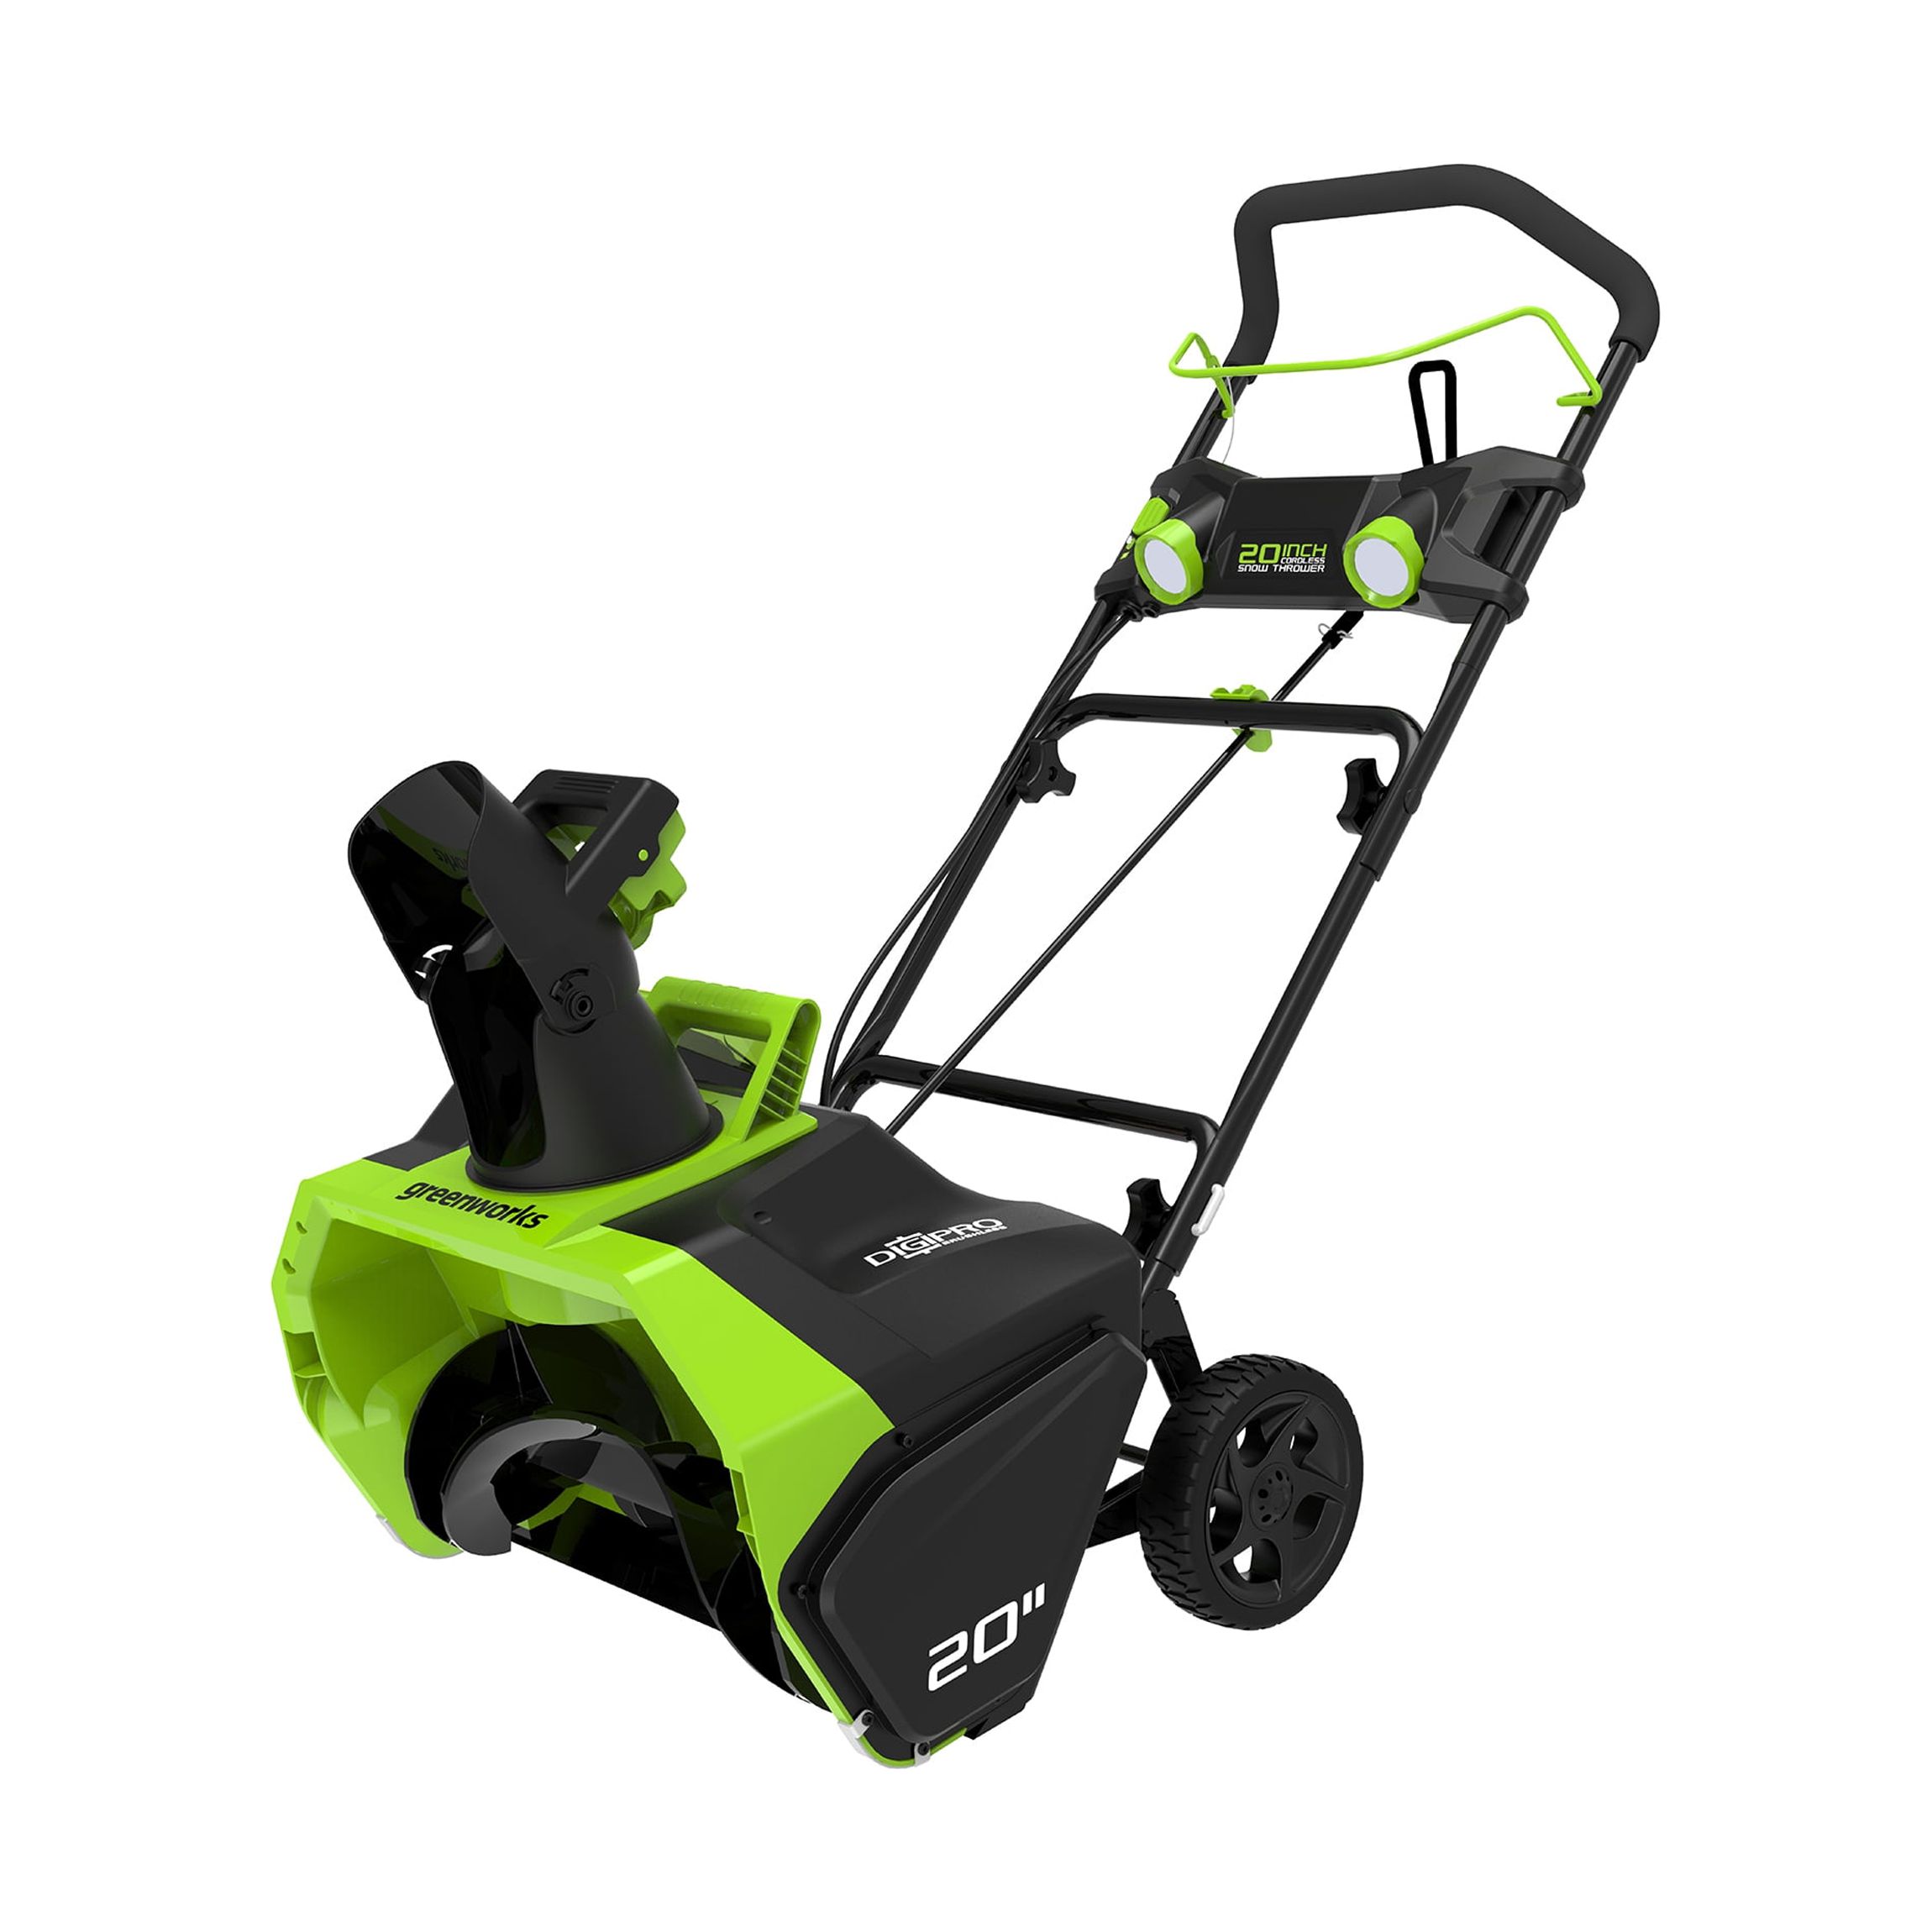 Greenworks 40V 20" Cordless Brushless Snow Blower + (1) 4.0 Ah Battery and Charger 26272 - image 1 of 9